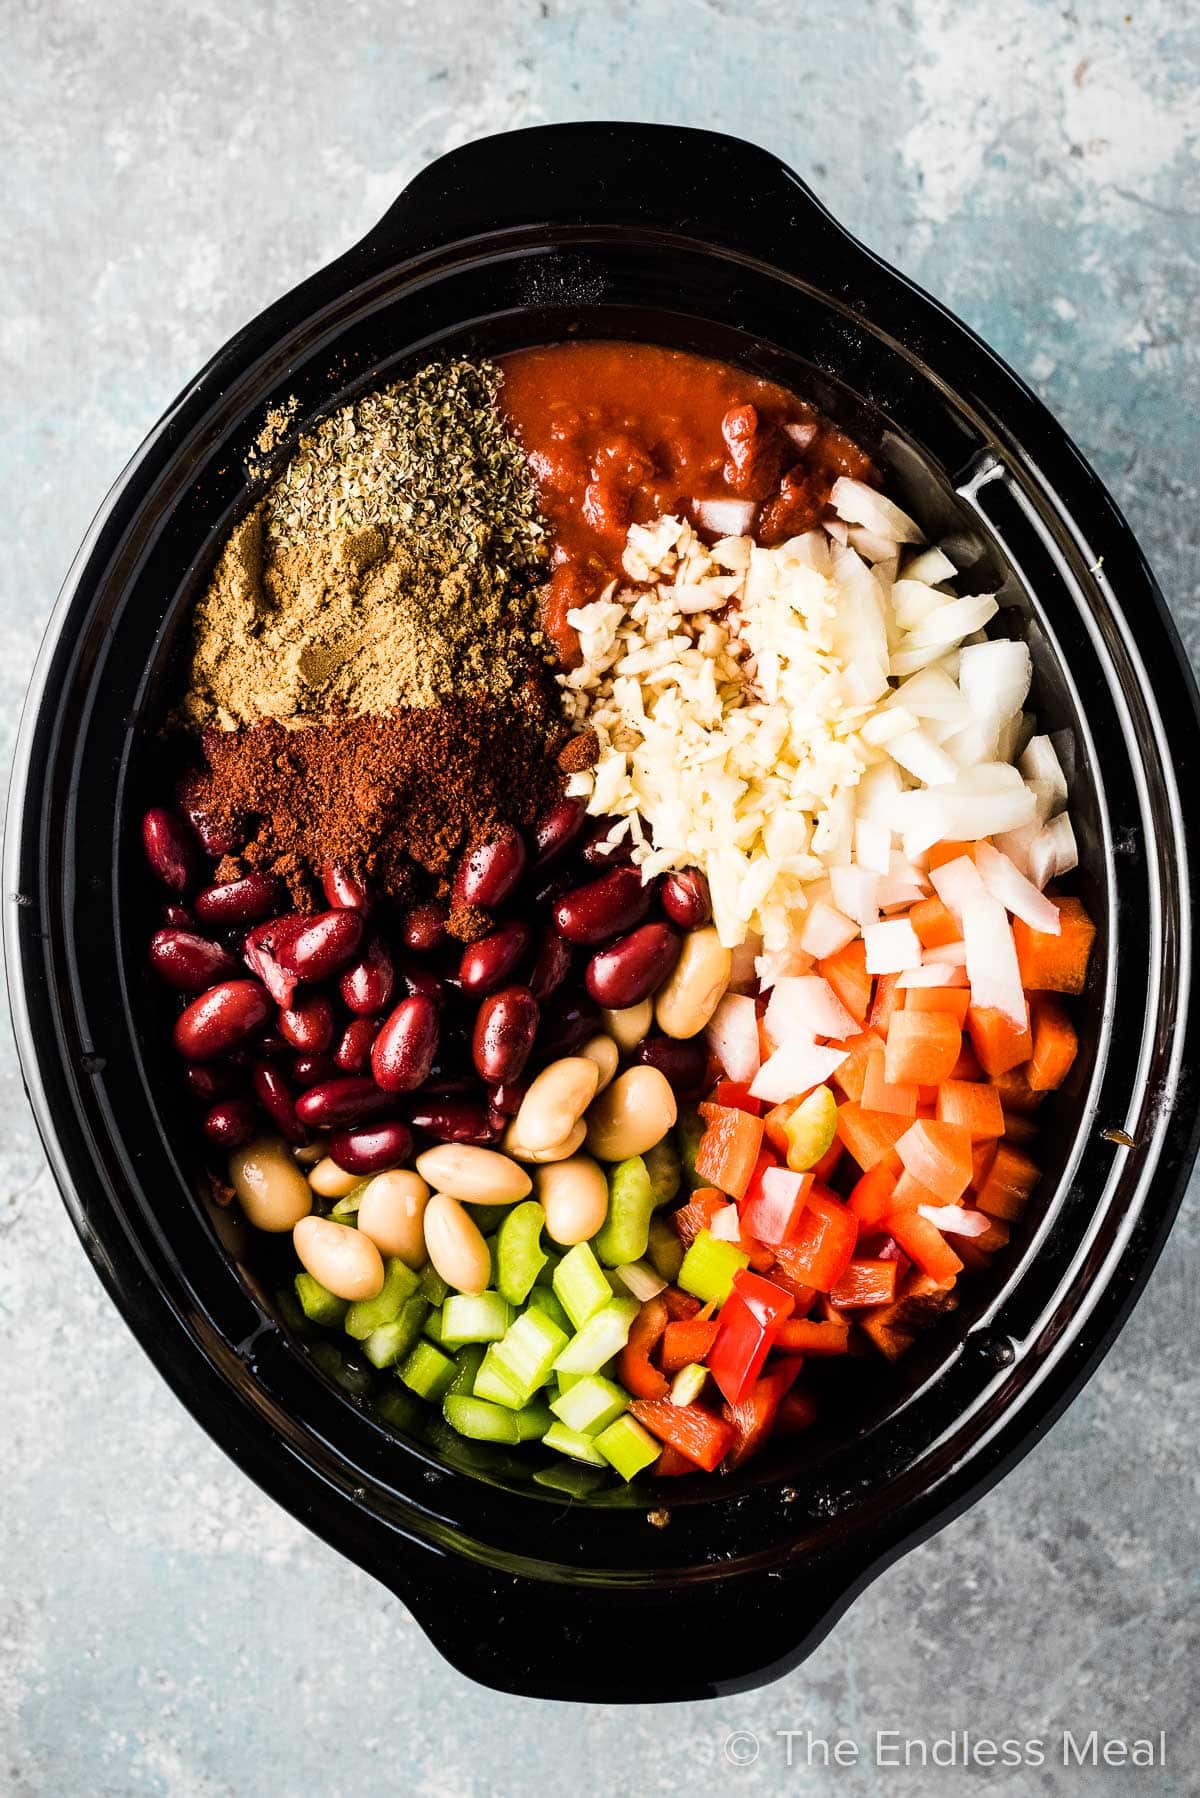 All the ingredients for this vegetarian chili in a slow cooker.